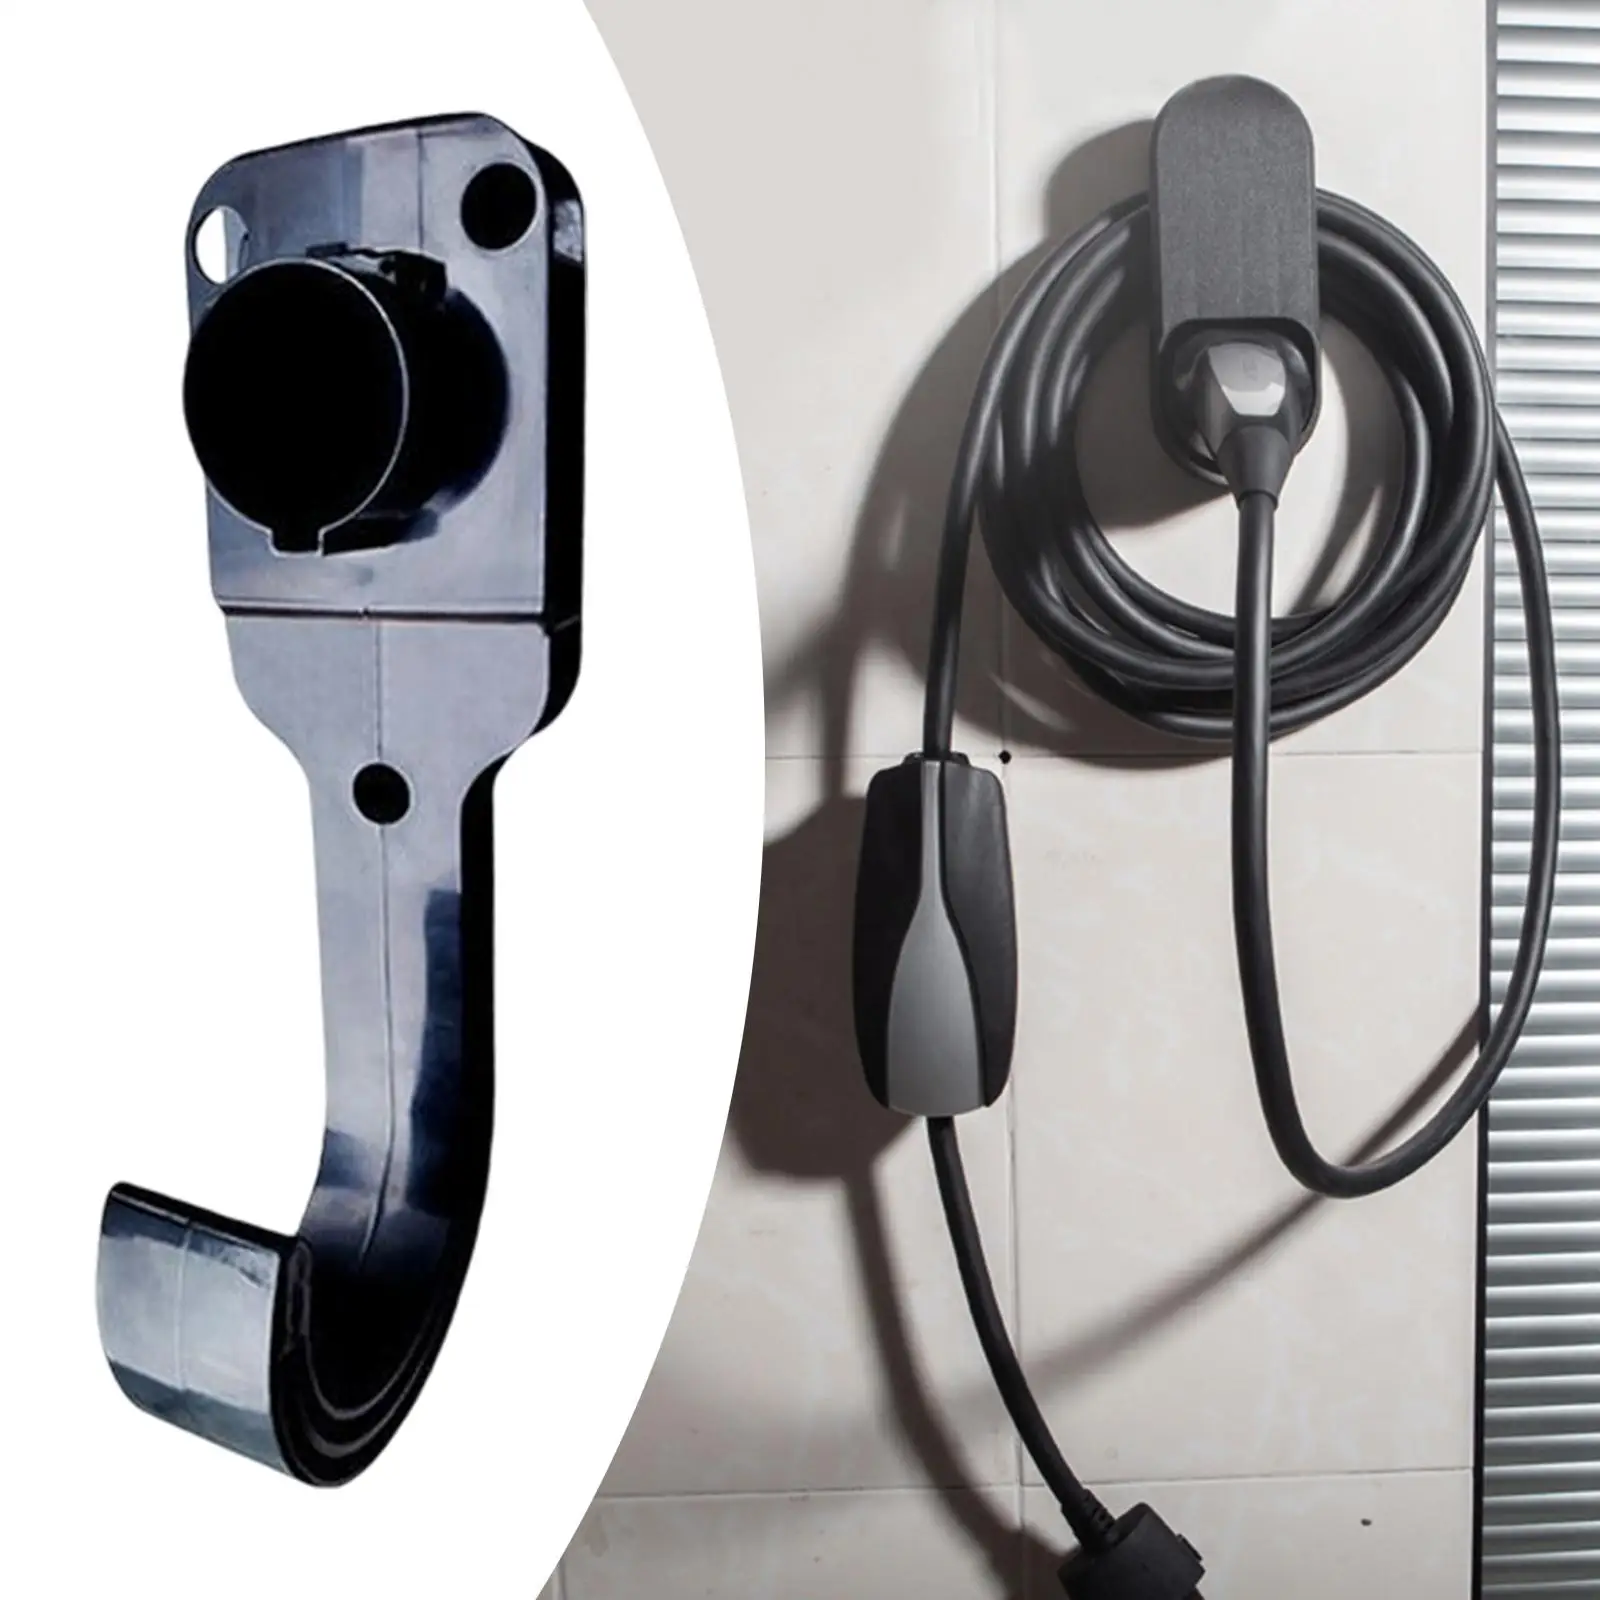  Holder  Dock Bracket Portable with Hook Screws Professional  Electric Vehicle Charging Cable  Standard